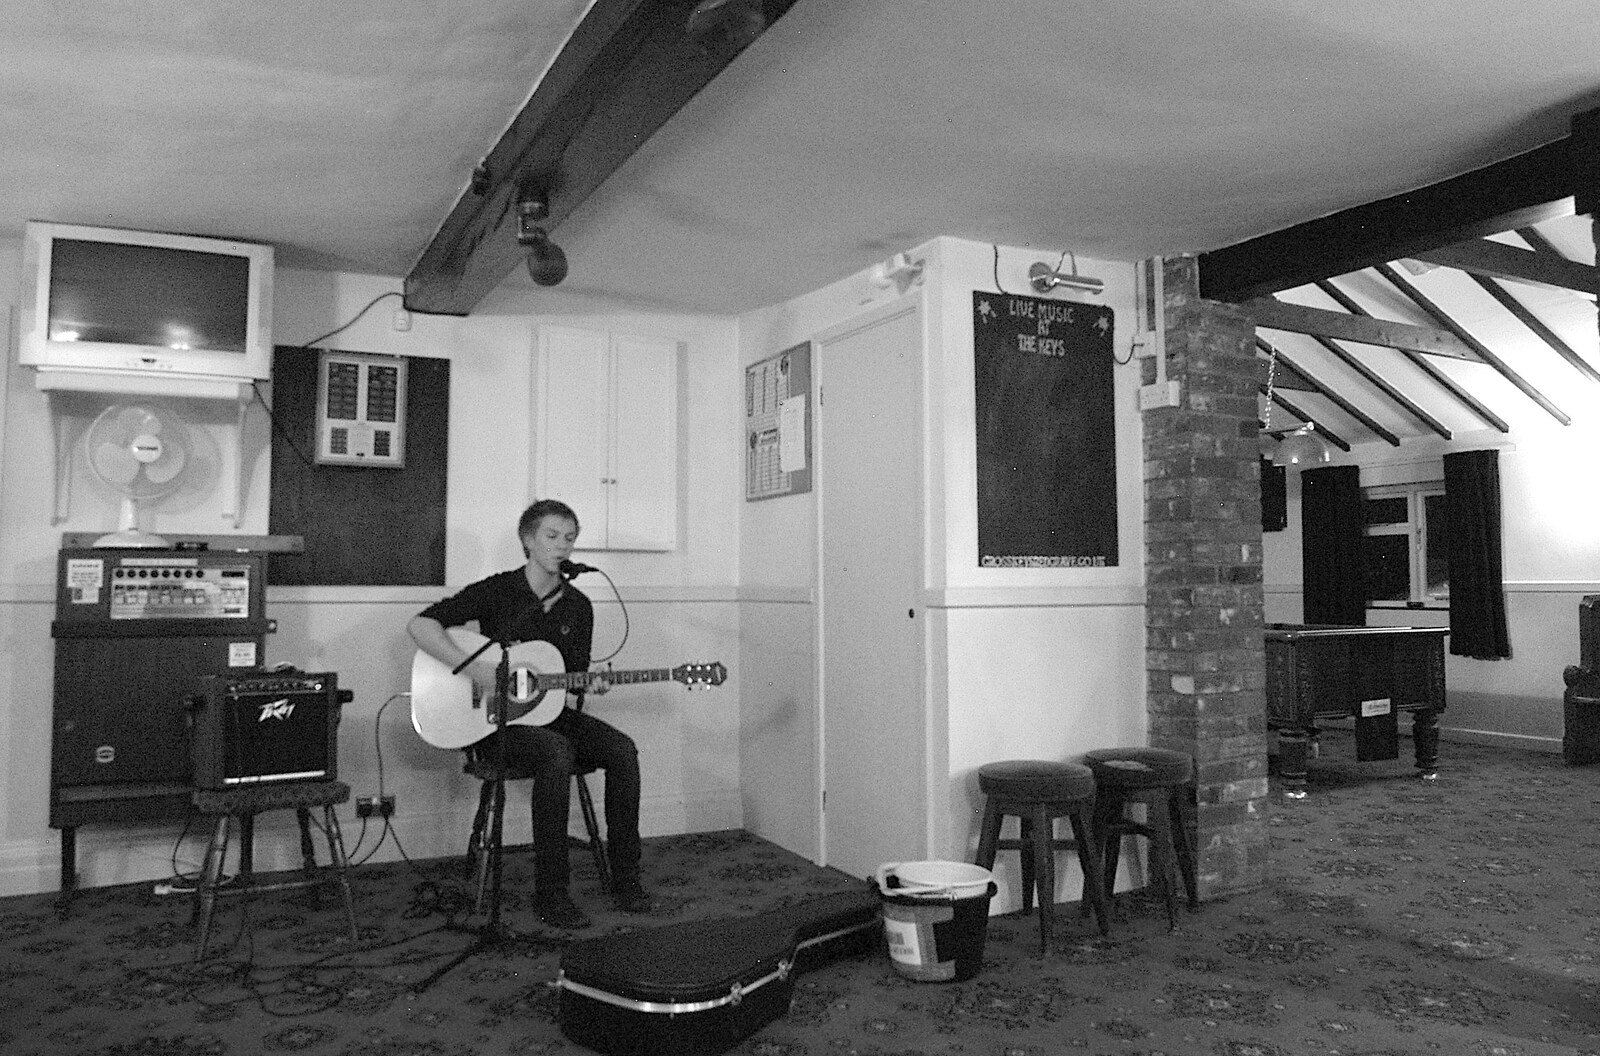 Rory plays to the crowds from Rory Hill's "Tour in a Night", Norfolk and Suffolk - 17th November 2006